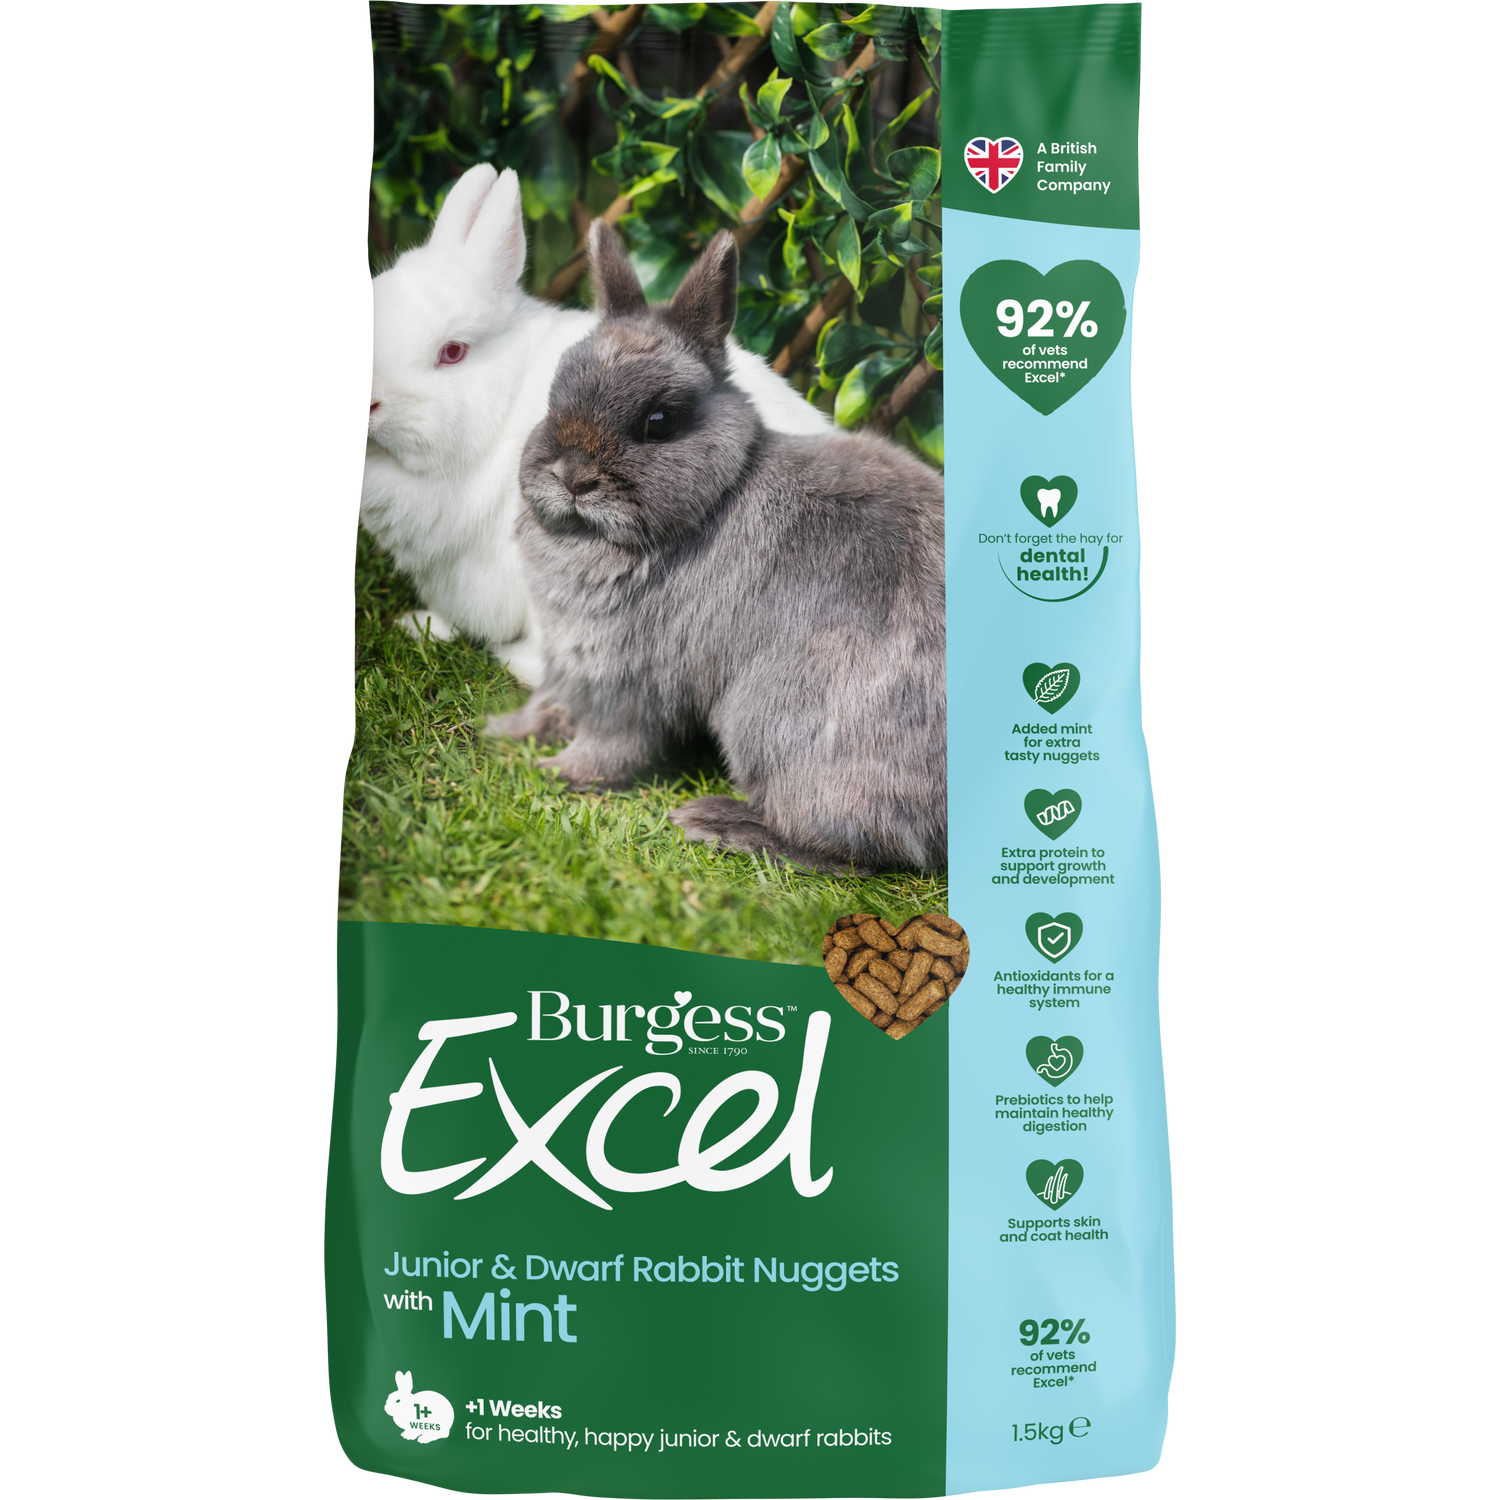 Burgess Excel Small Animal Mint Nuggets Food 1.5kg Image